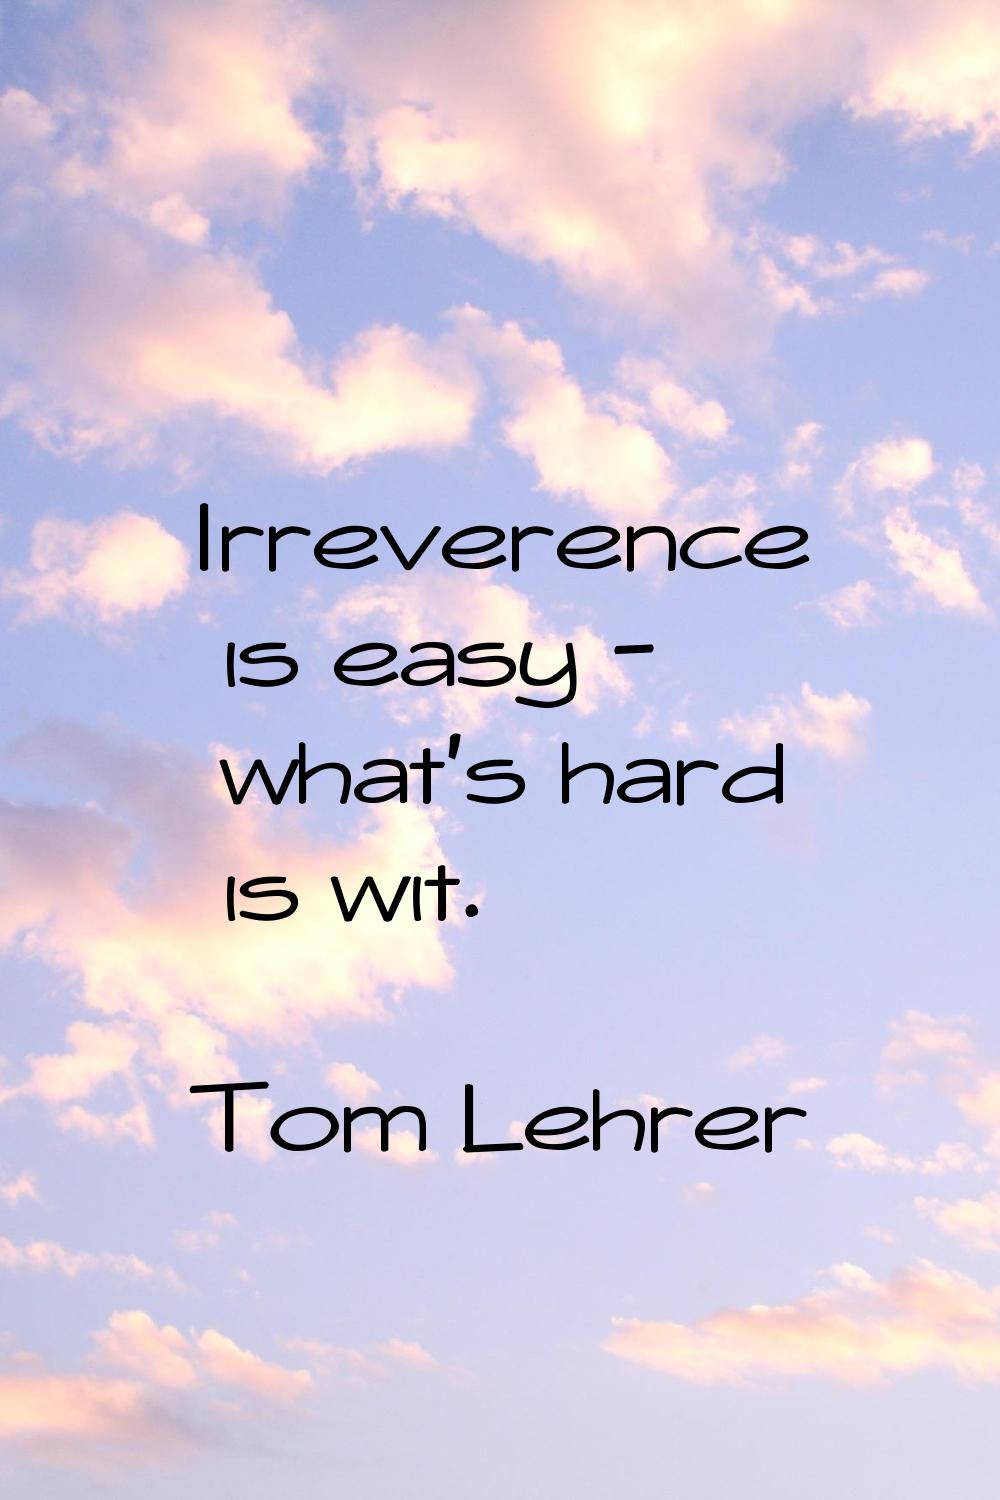 Irreverence is easy - what's hard is wit.